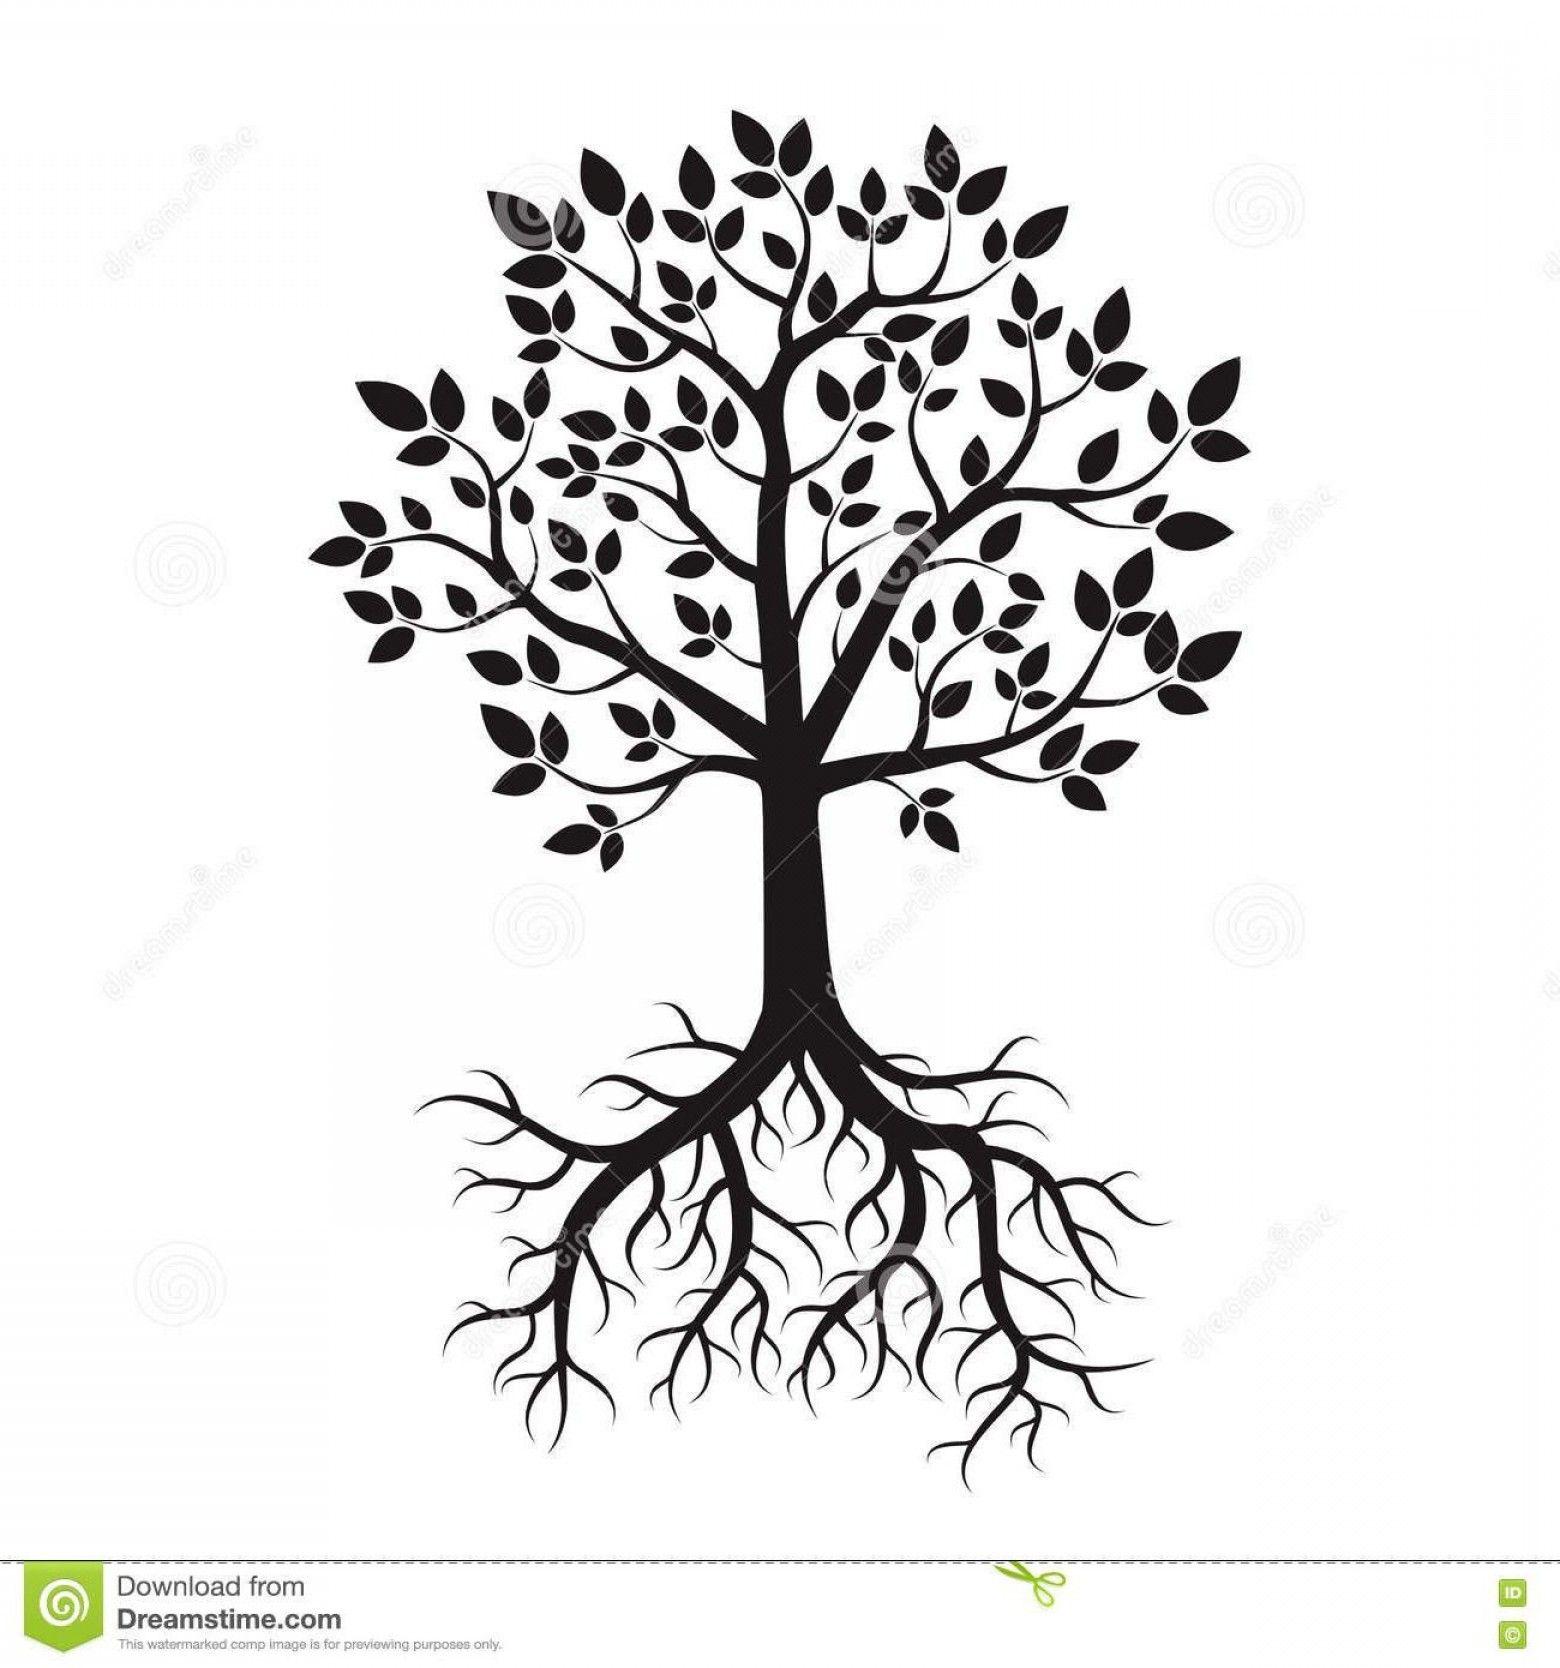 Black and White Tree with Roots Logo - Best Free Tree Roots Logo Vector Images | SOIDERGI